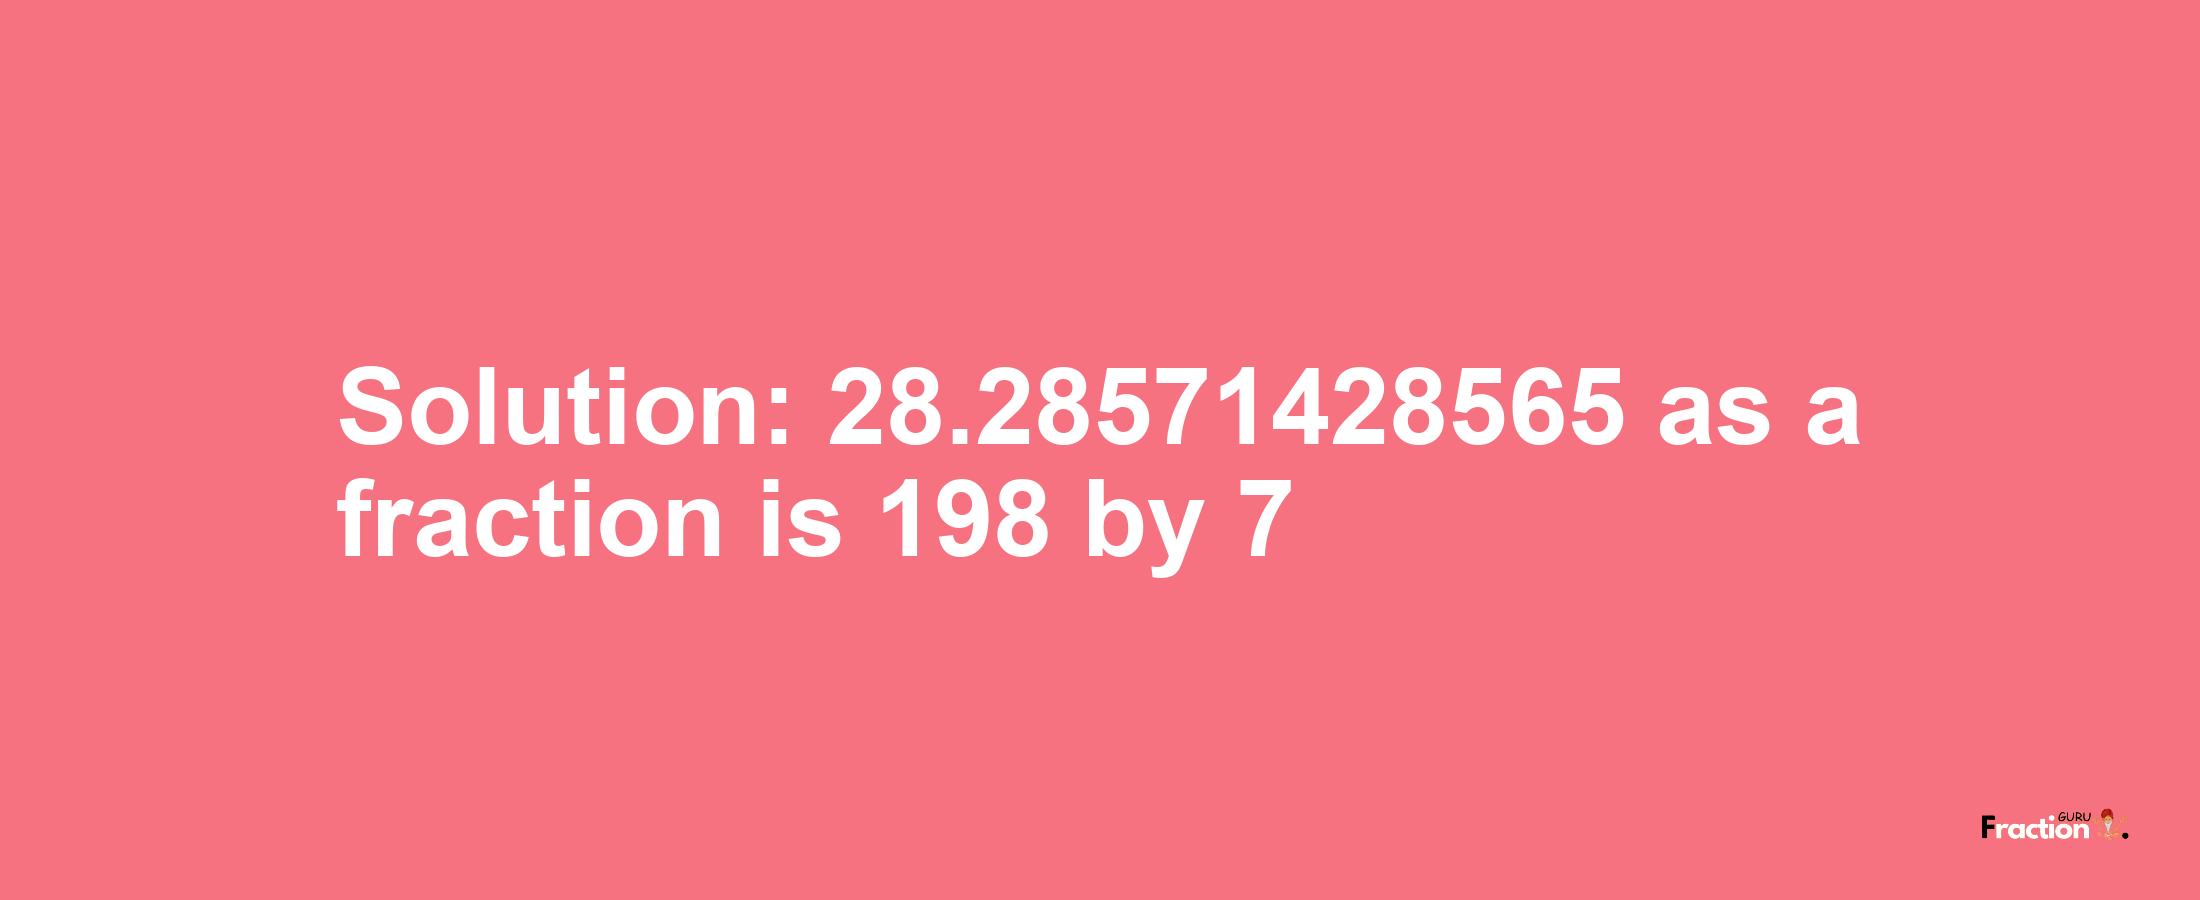 Solution:28.28571428565 as a fraction is 198/7